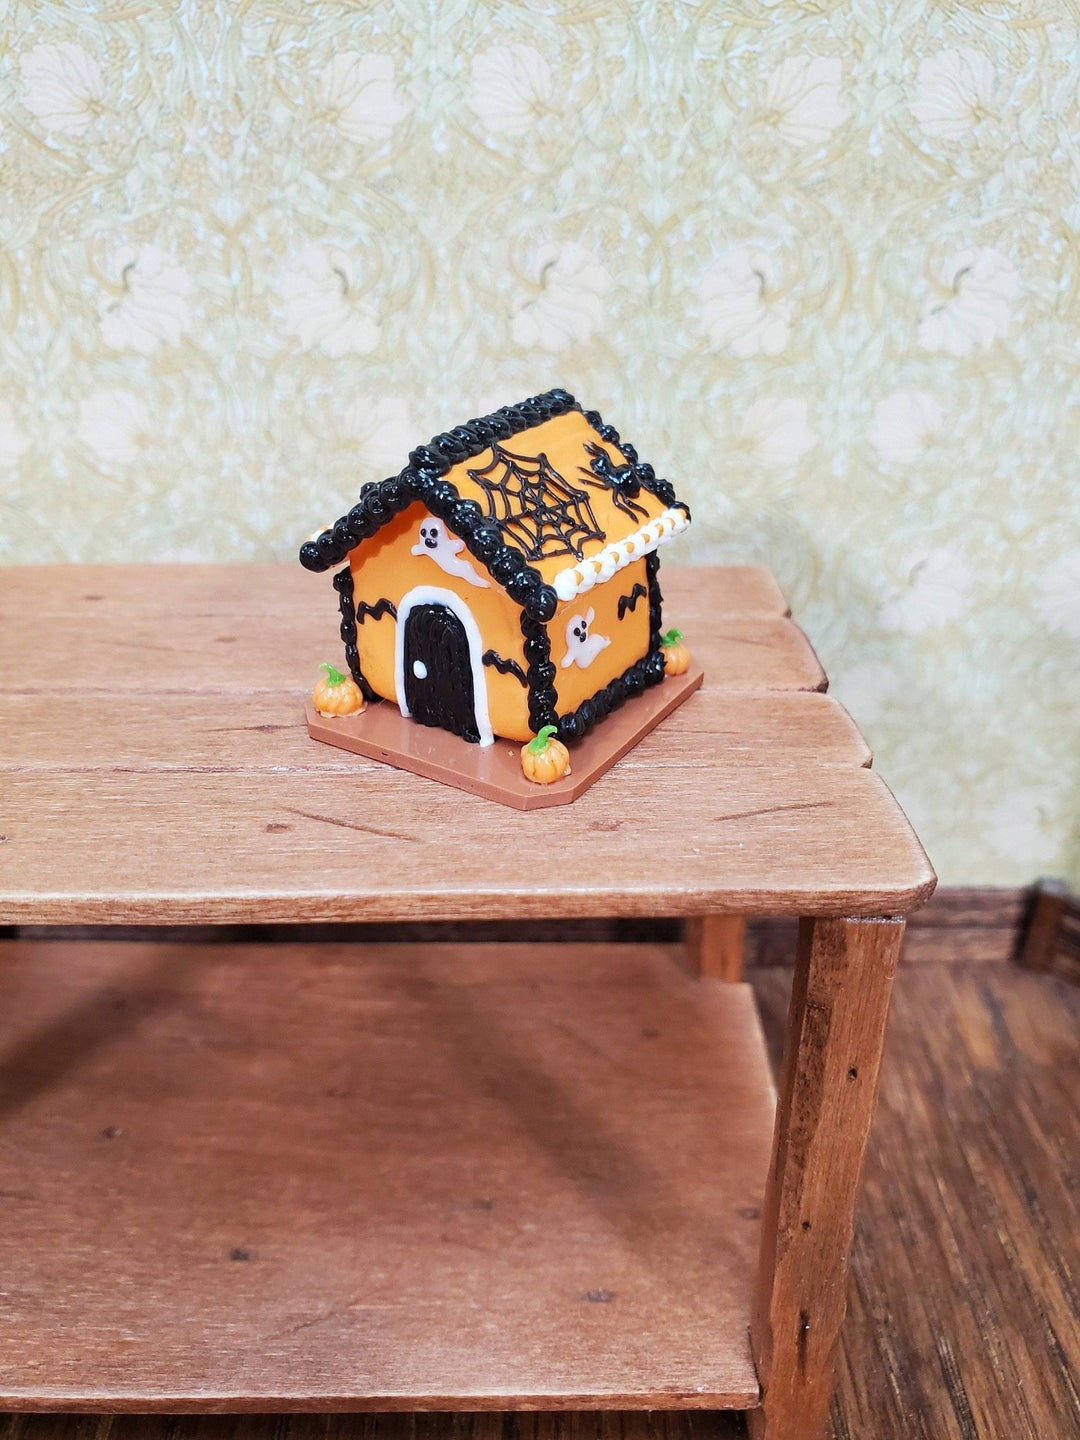 Dollhouse Halloween Gingerbread House 1:12 Scale Miniature Ghosts Spiders Webs - Miniature Crush